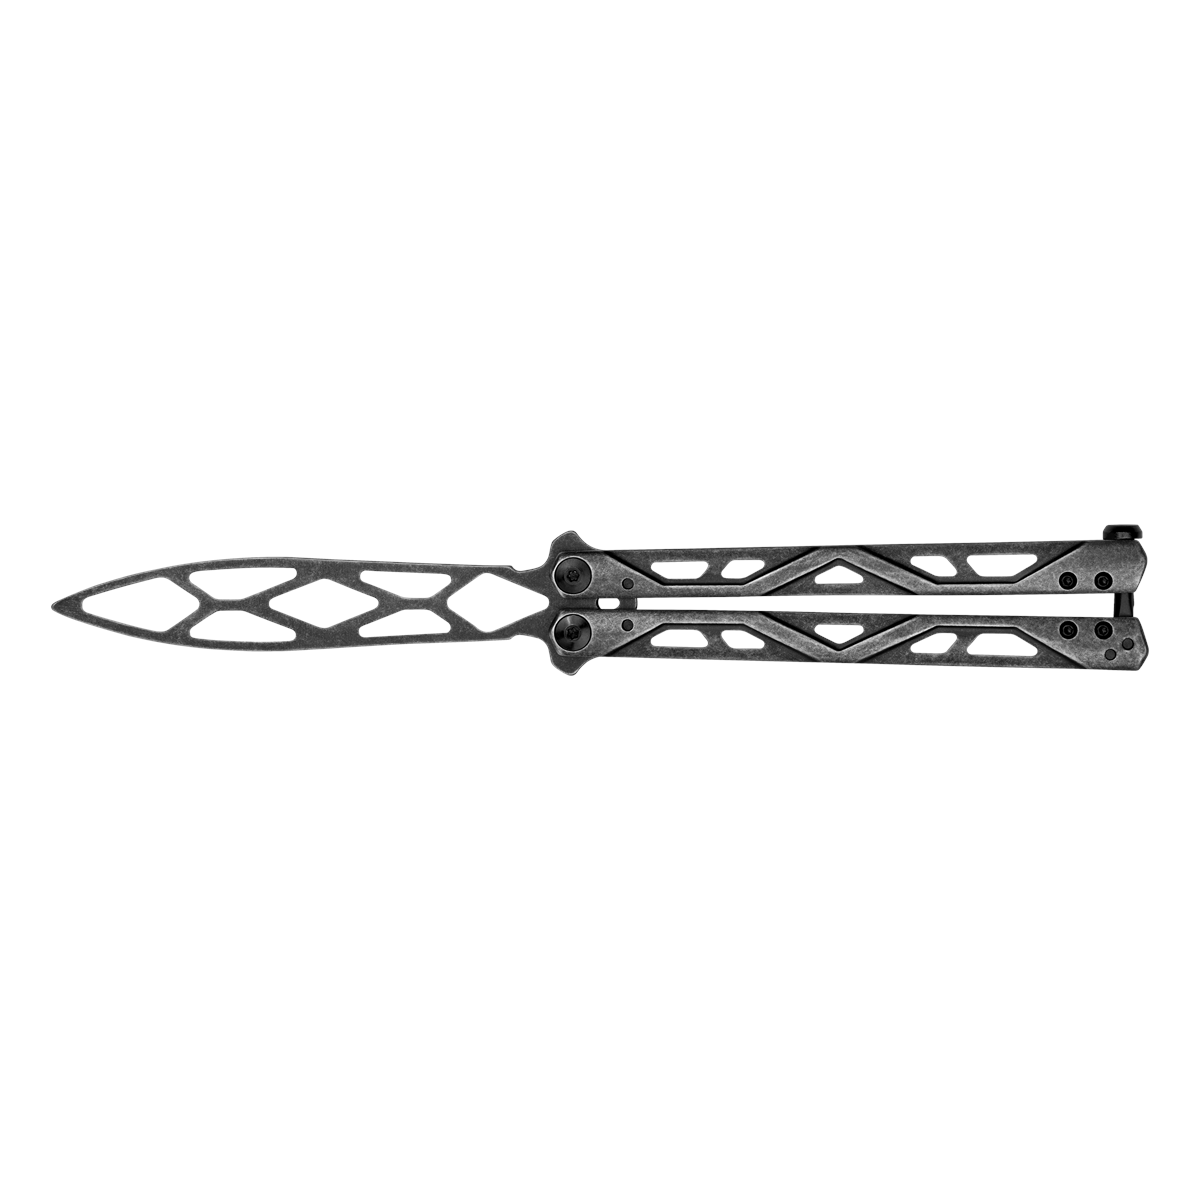 Picture of Kershaw KER4950TR 9.6 in. Balanza Stainless Steel Handles Trainer KVT Balisong Knife - Blackwashed Dull Blade